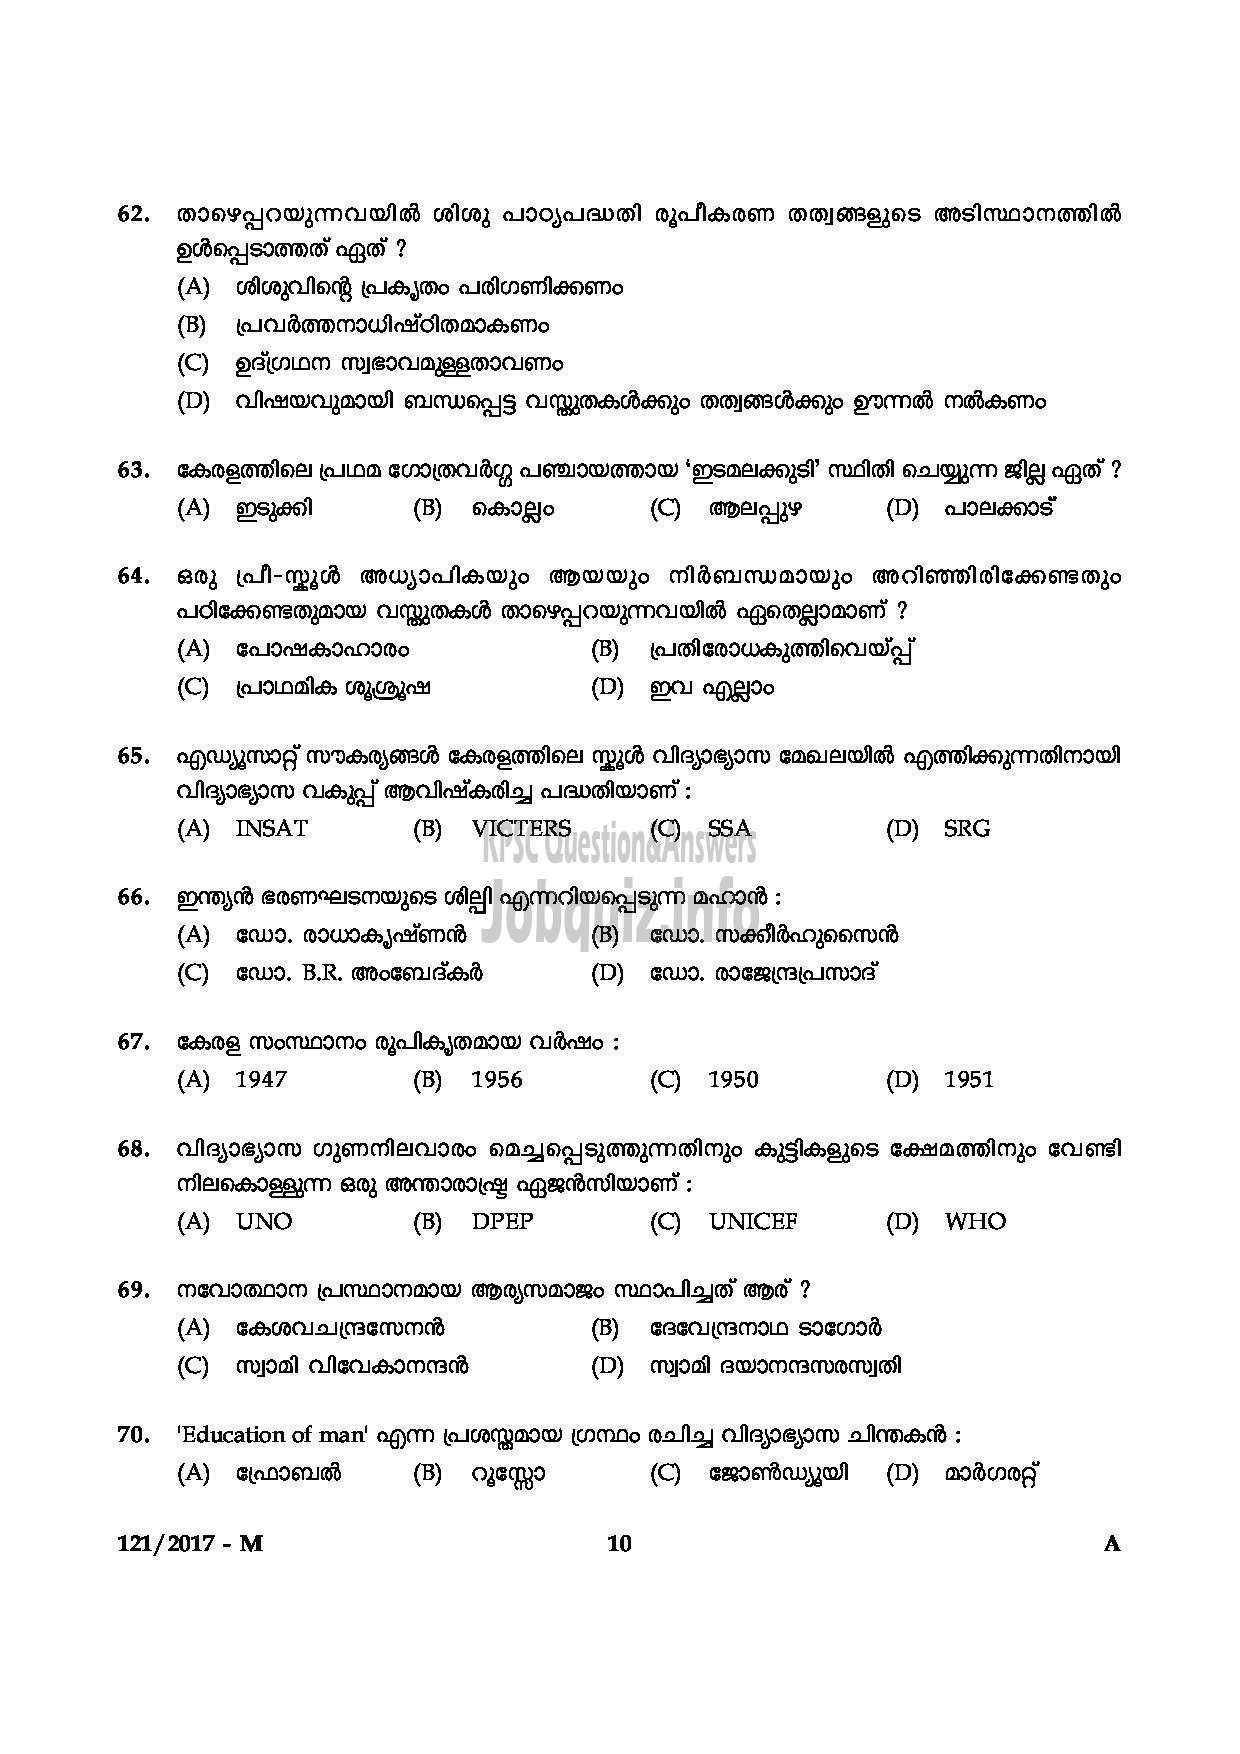 Kerala PSC Question Paper - PRE PRIMARY TEACHER EDUCATION MALAYALAM QUESTION -10